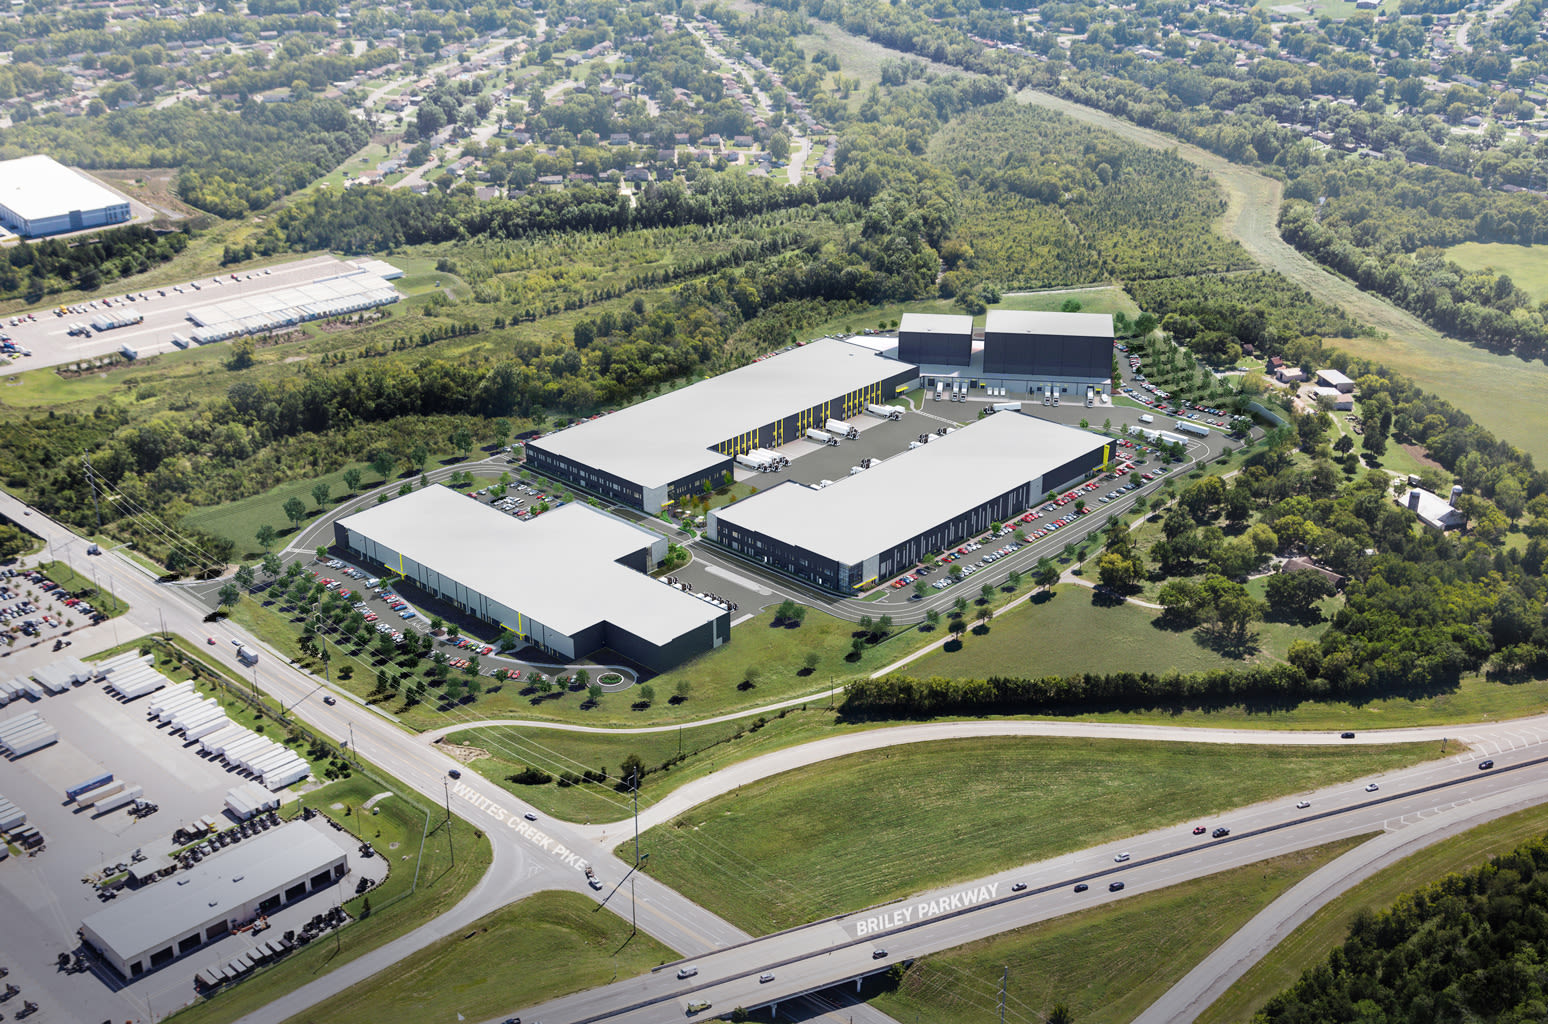 Live Event Production Company Rock Lititz to Open 55-Acre Nashville Campus in 2025